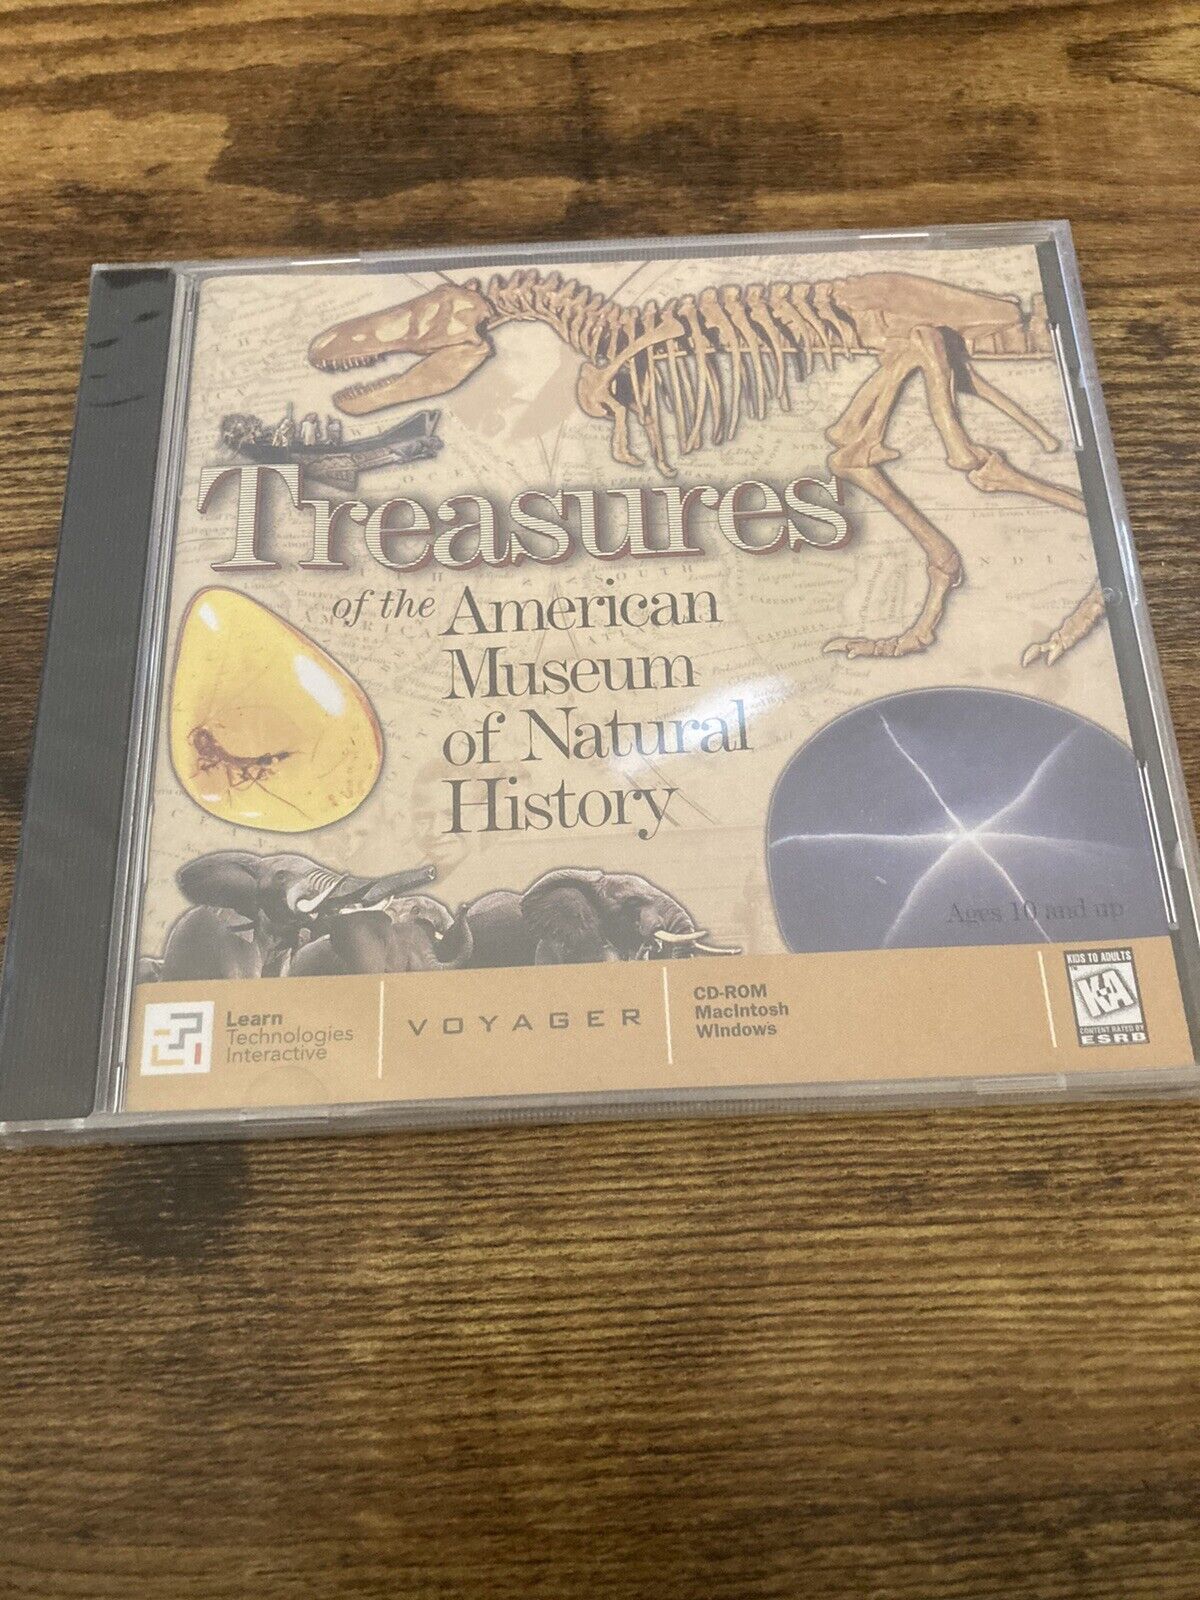 Treasures of the American Museum Of Natural History CD ROM Voyager